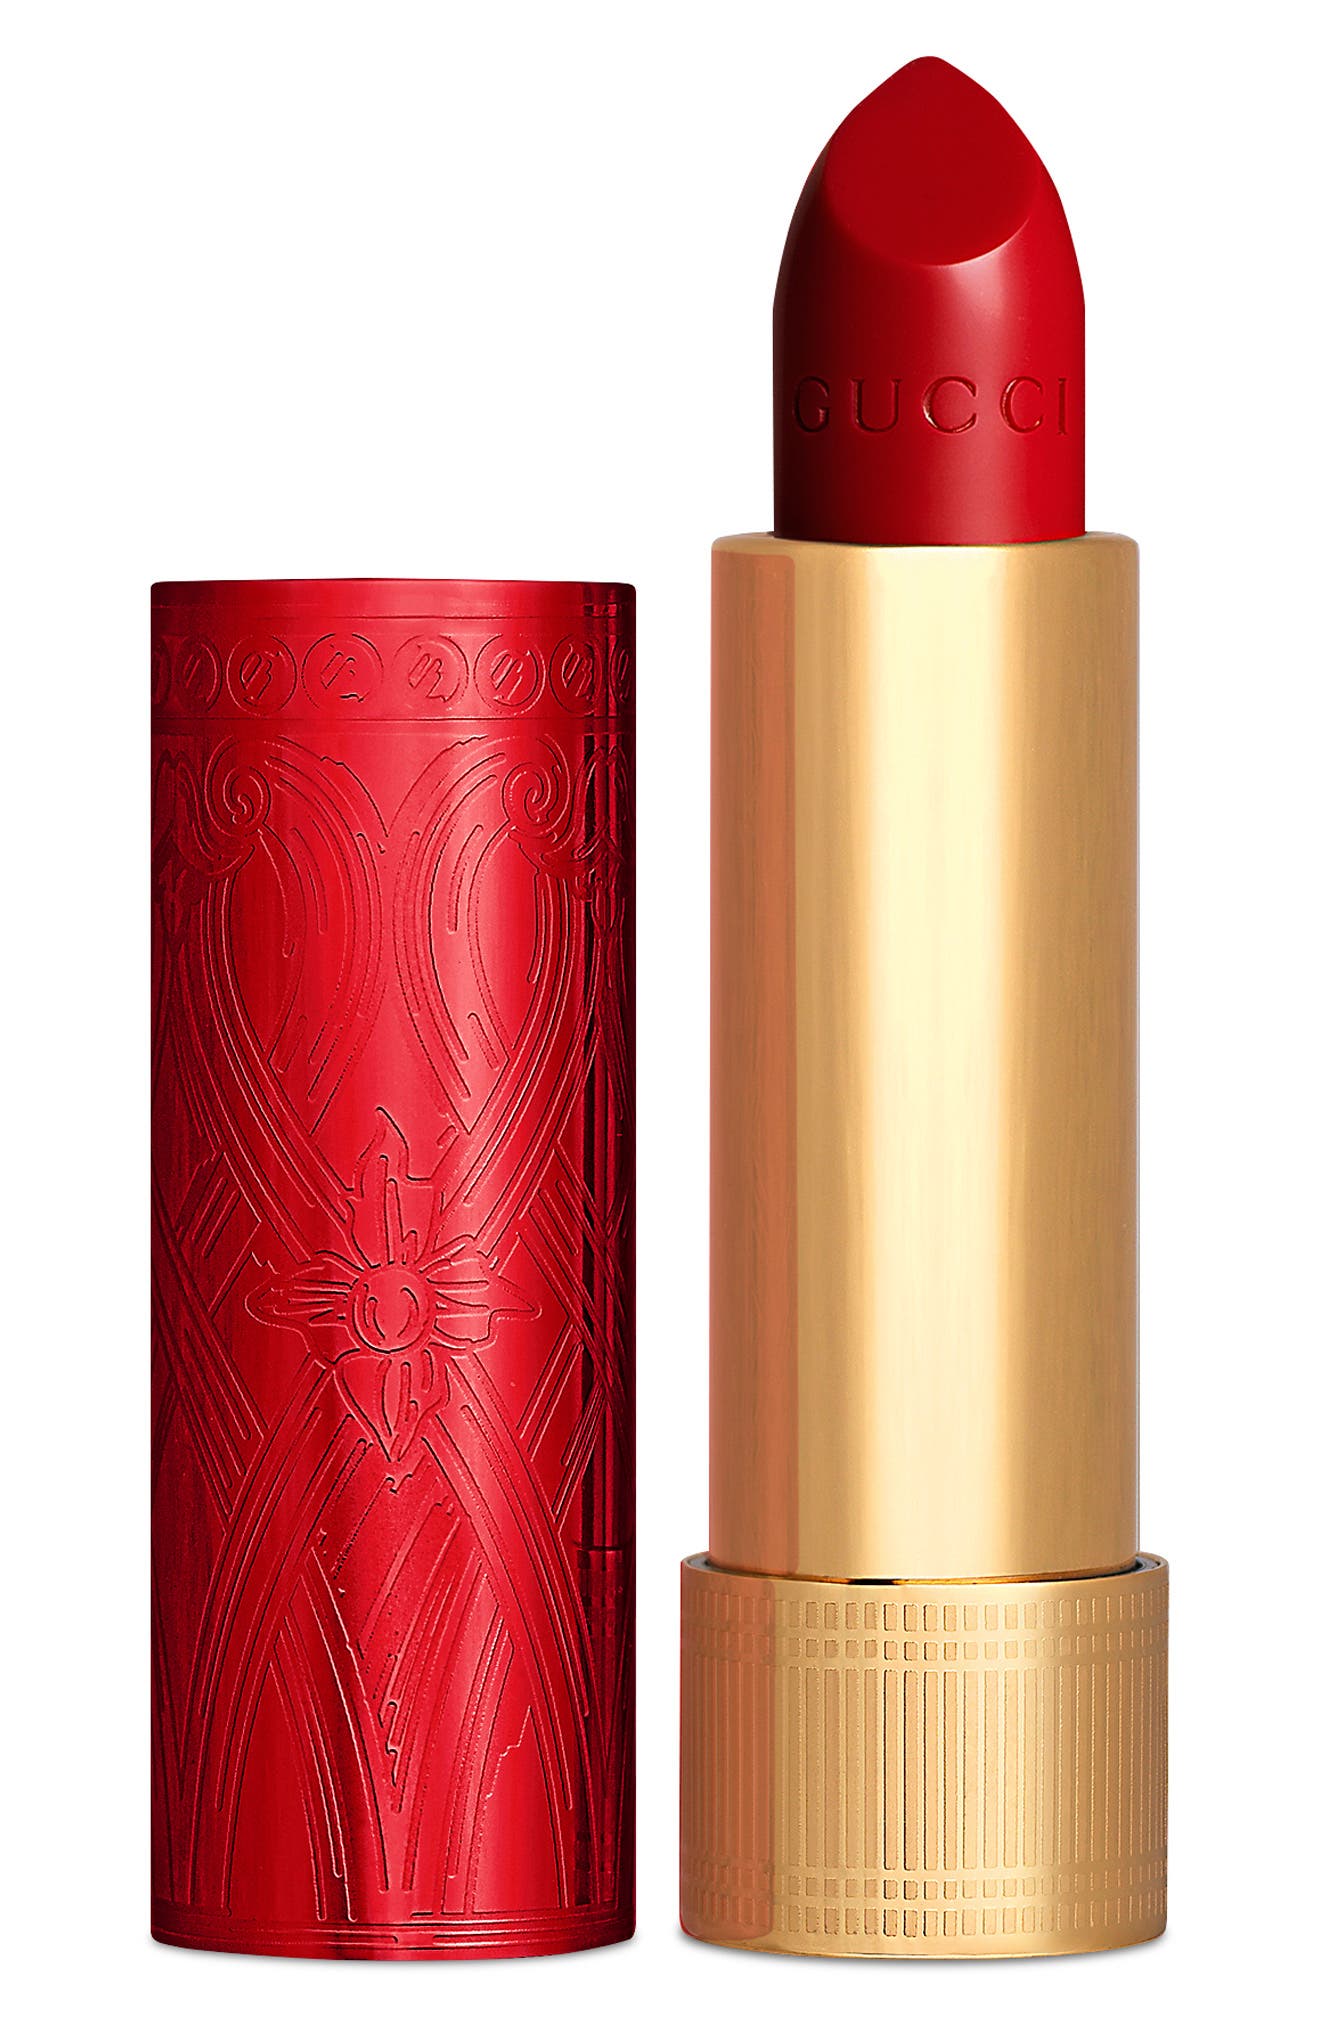 Gucci Lunar New Year Rouge a Levres Satin Lipstick in 25 Goldie Red at Nordstrom